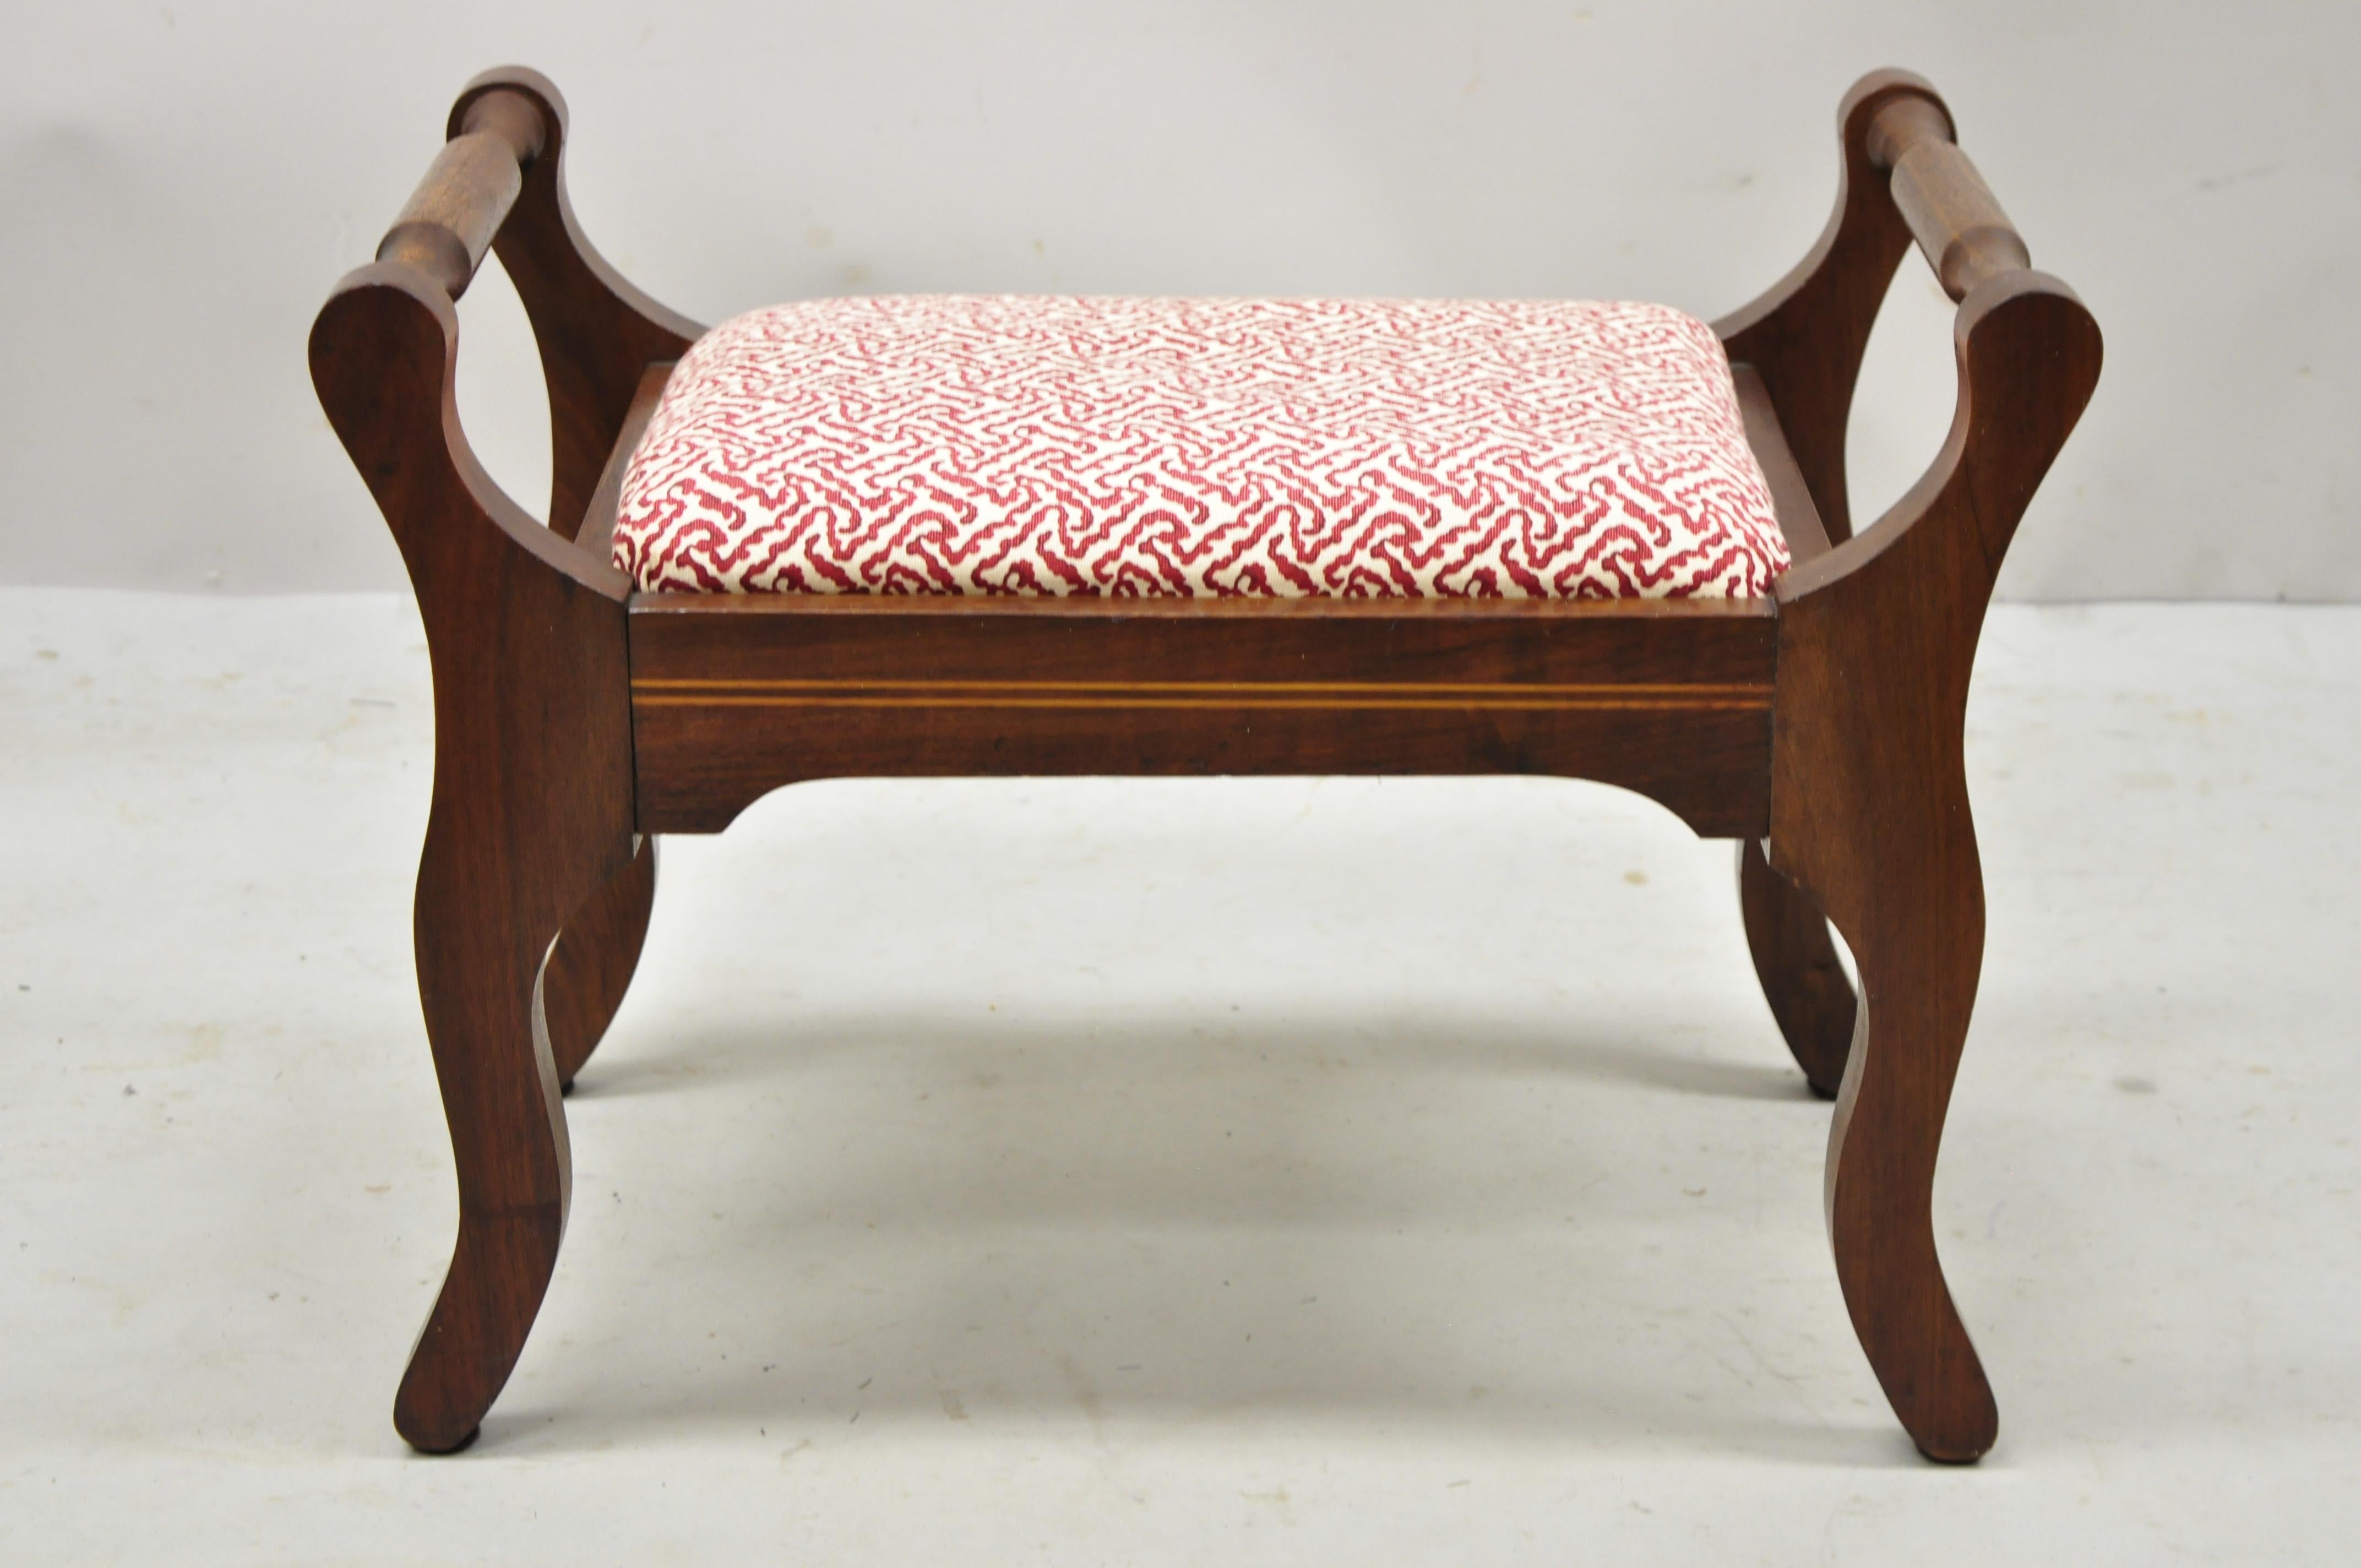 Antique Mahogany Victorian Upholstered stool footstool with handles and inlay. Item features turn carved handles, inlay skirt, cabriole legs, very nice antique item. Circa early to mid 20th century. Measurements: 16.5